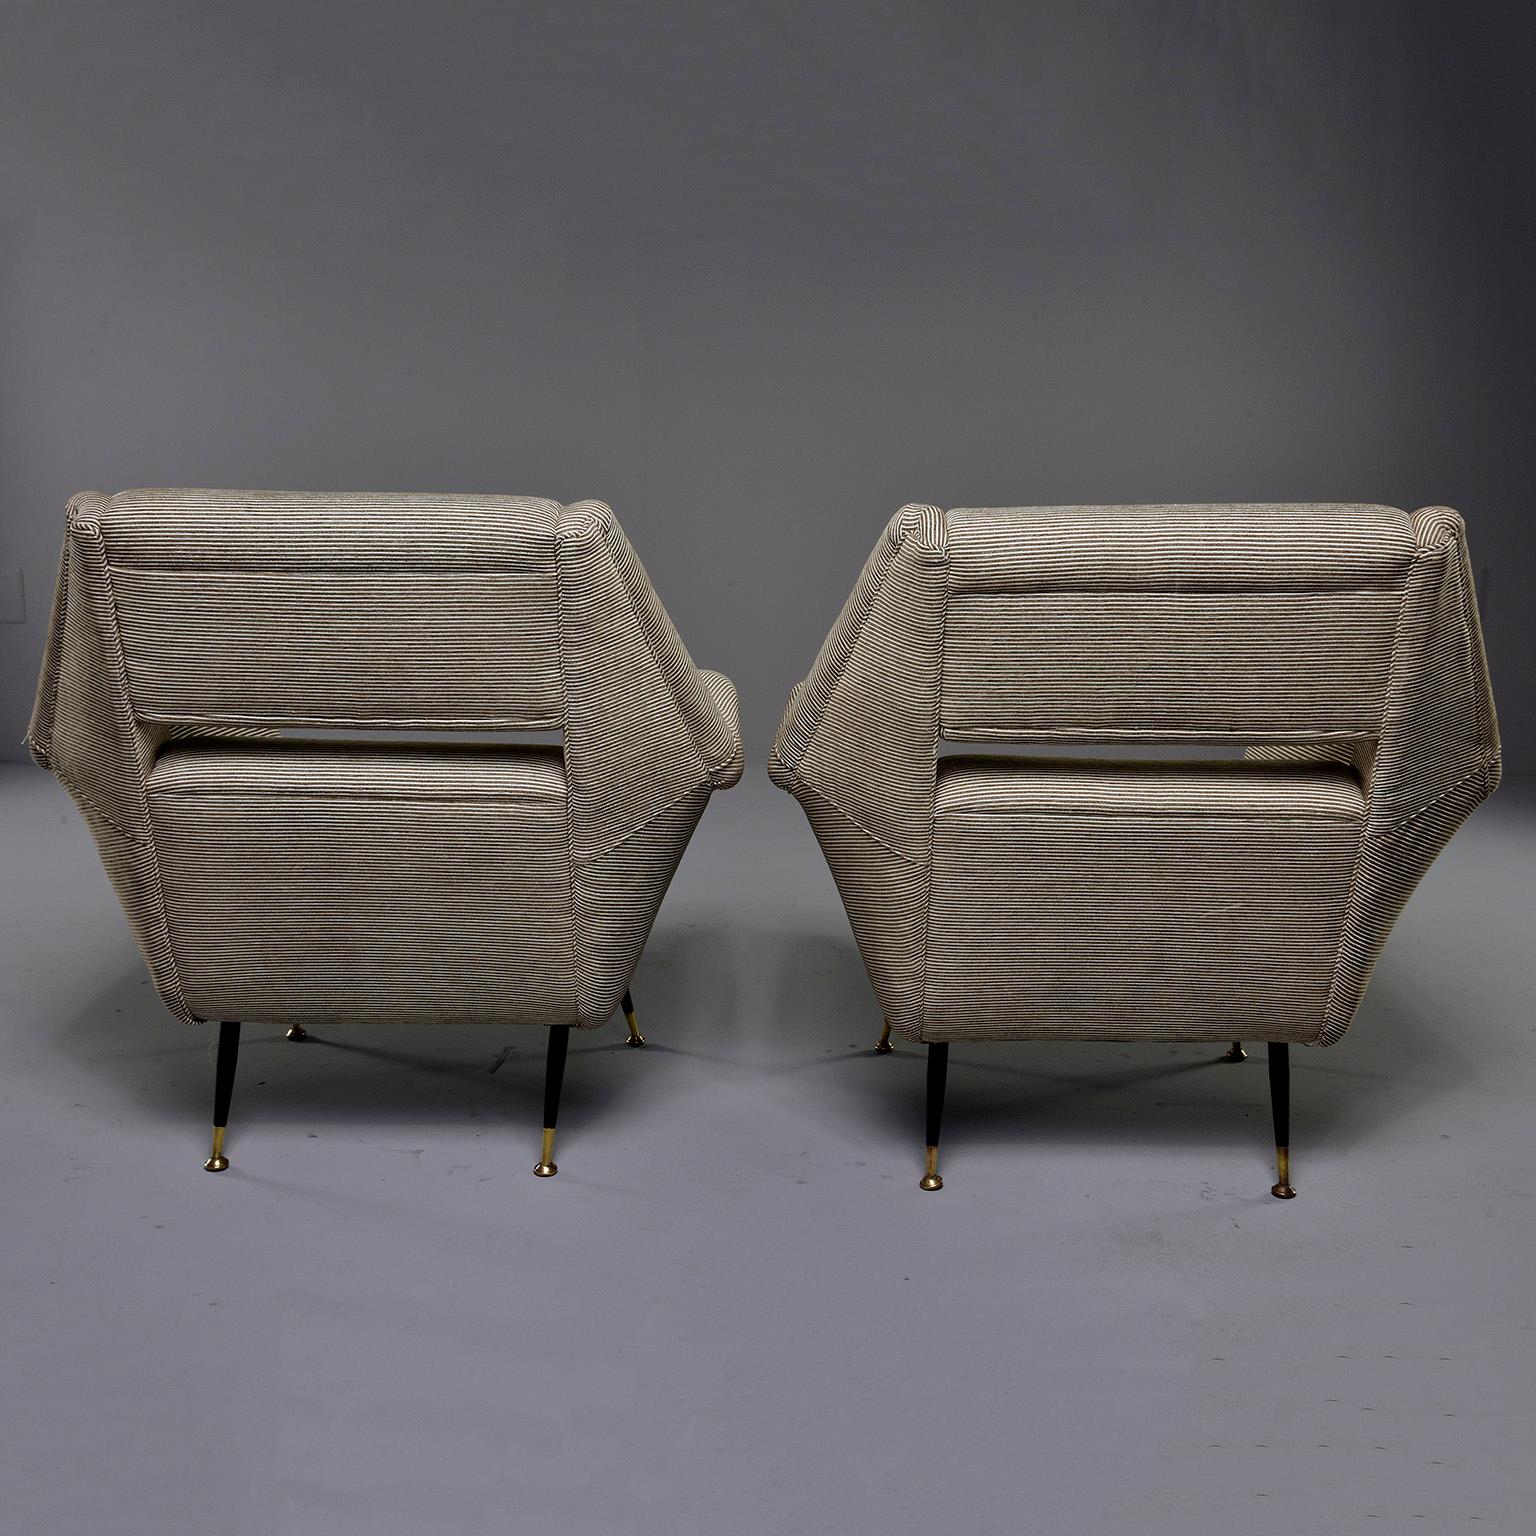 Mid-Century Modern Pair of Newly Upholstered Midcentury Chairs by Gigi Radice for Minotti